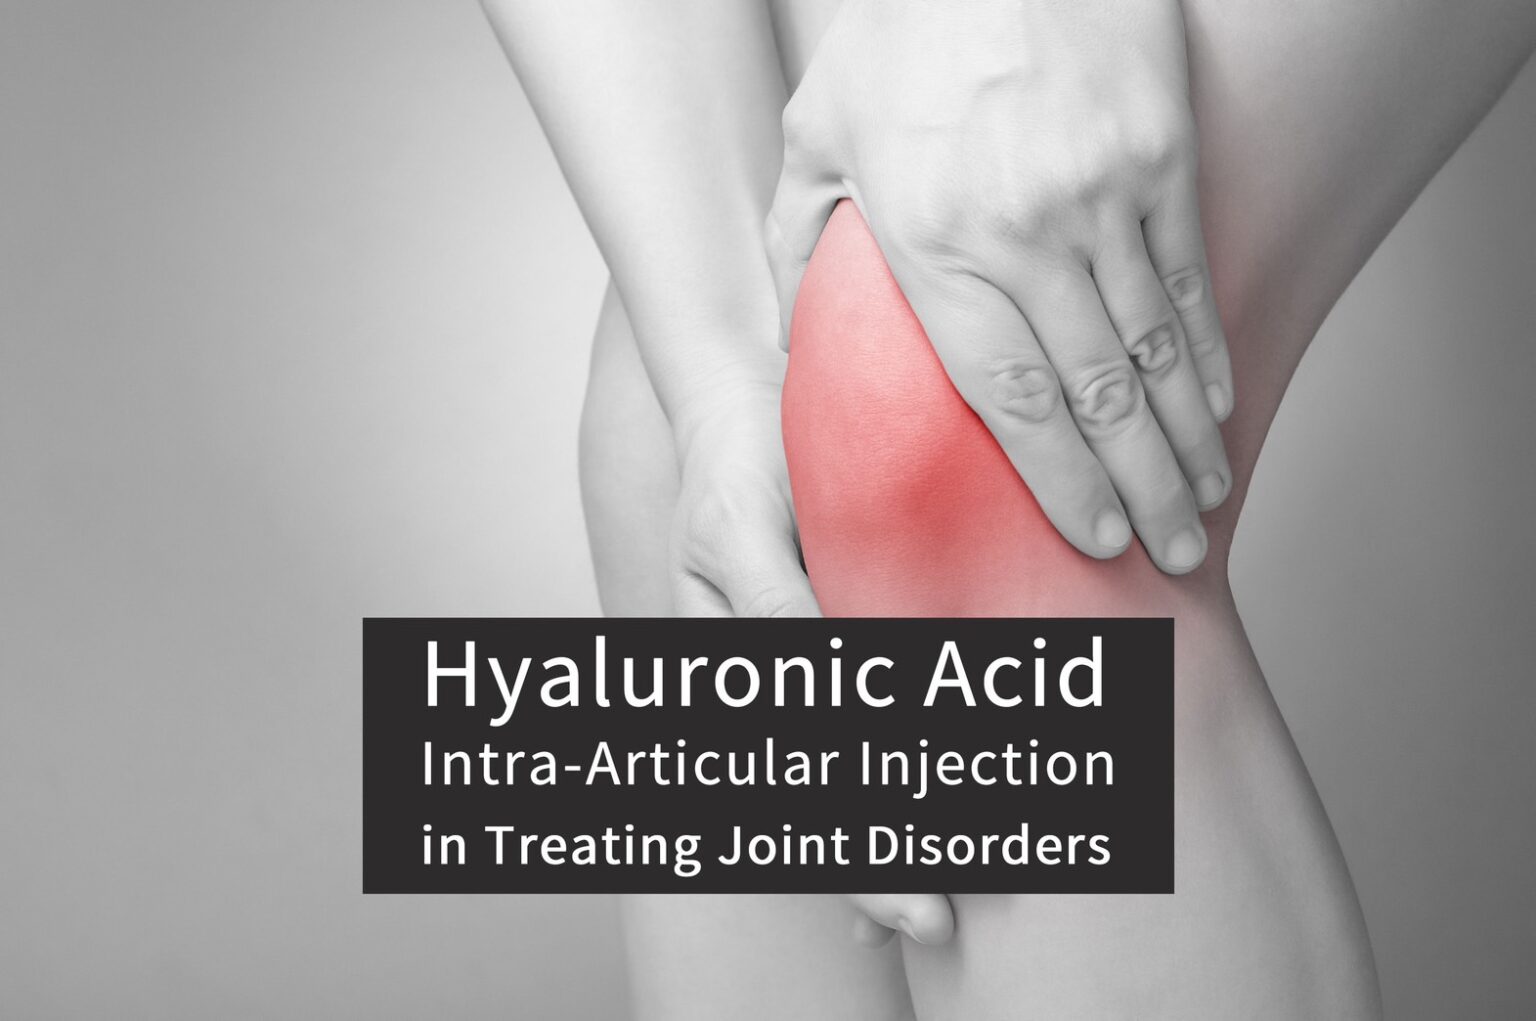 Hyaluronic Acid Intra-Articular Injection in Treating Joint Disorders